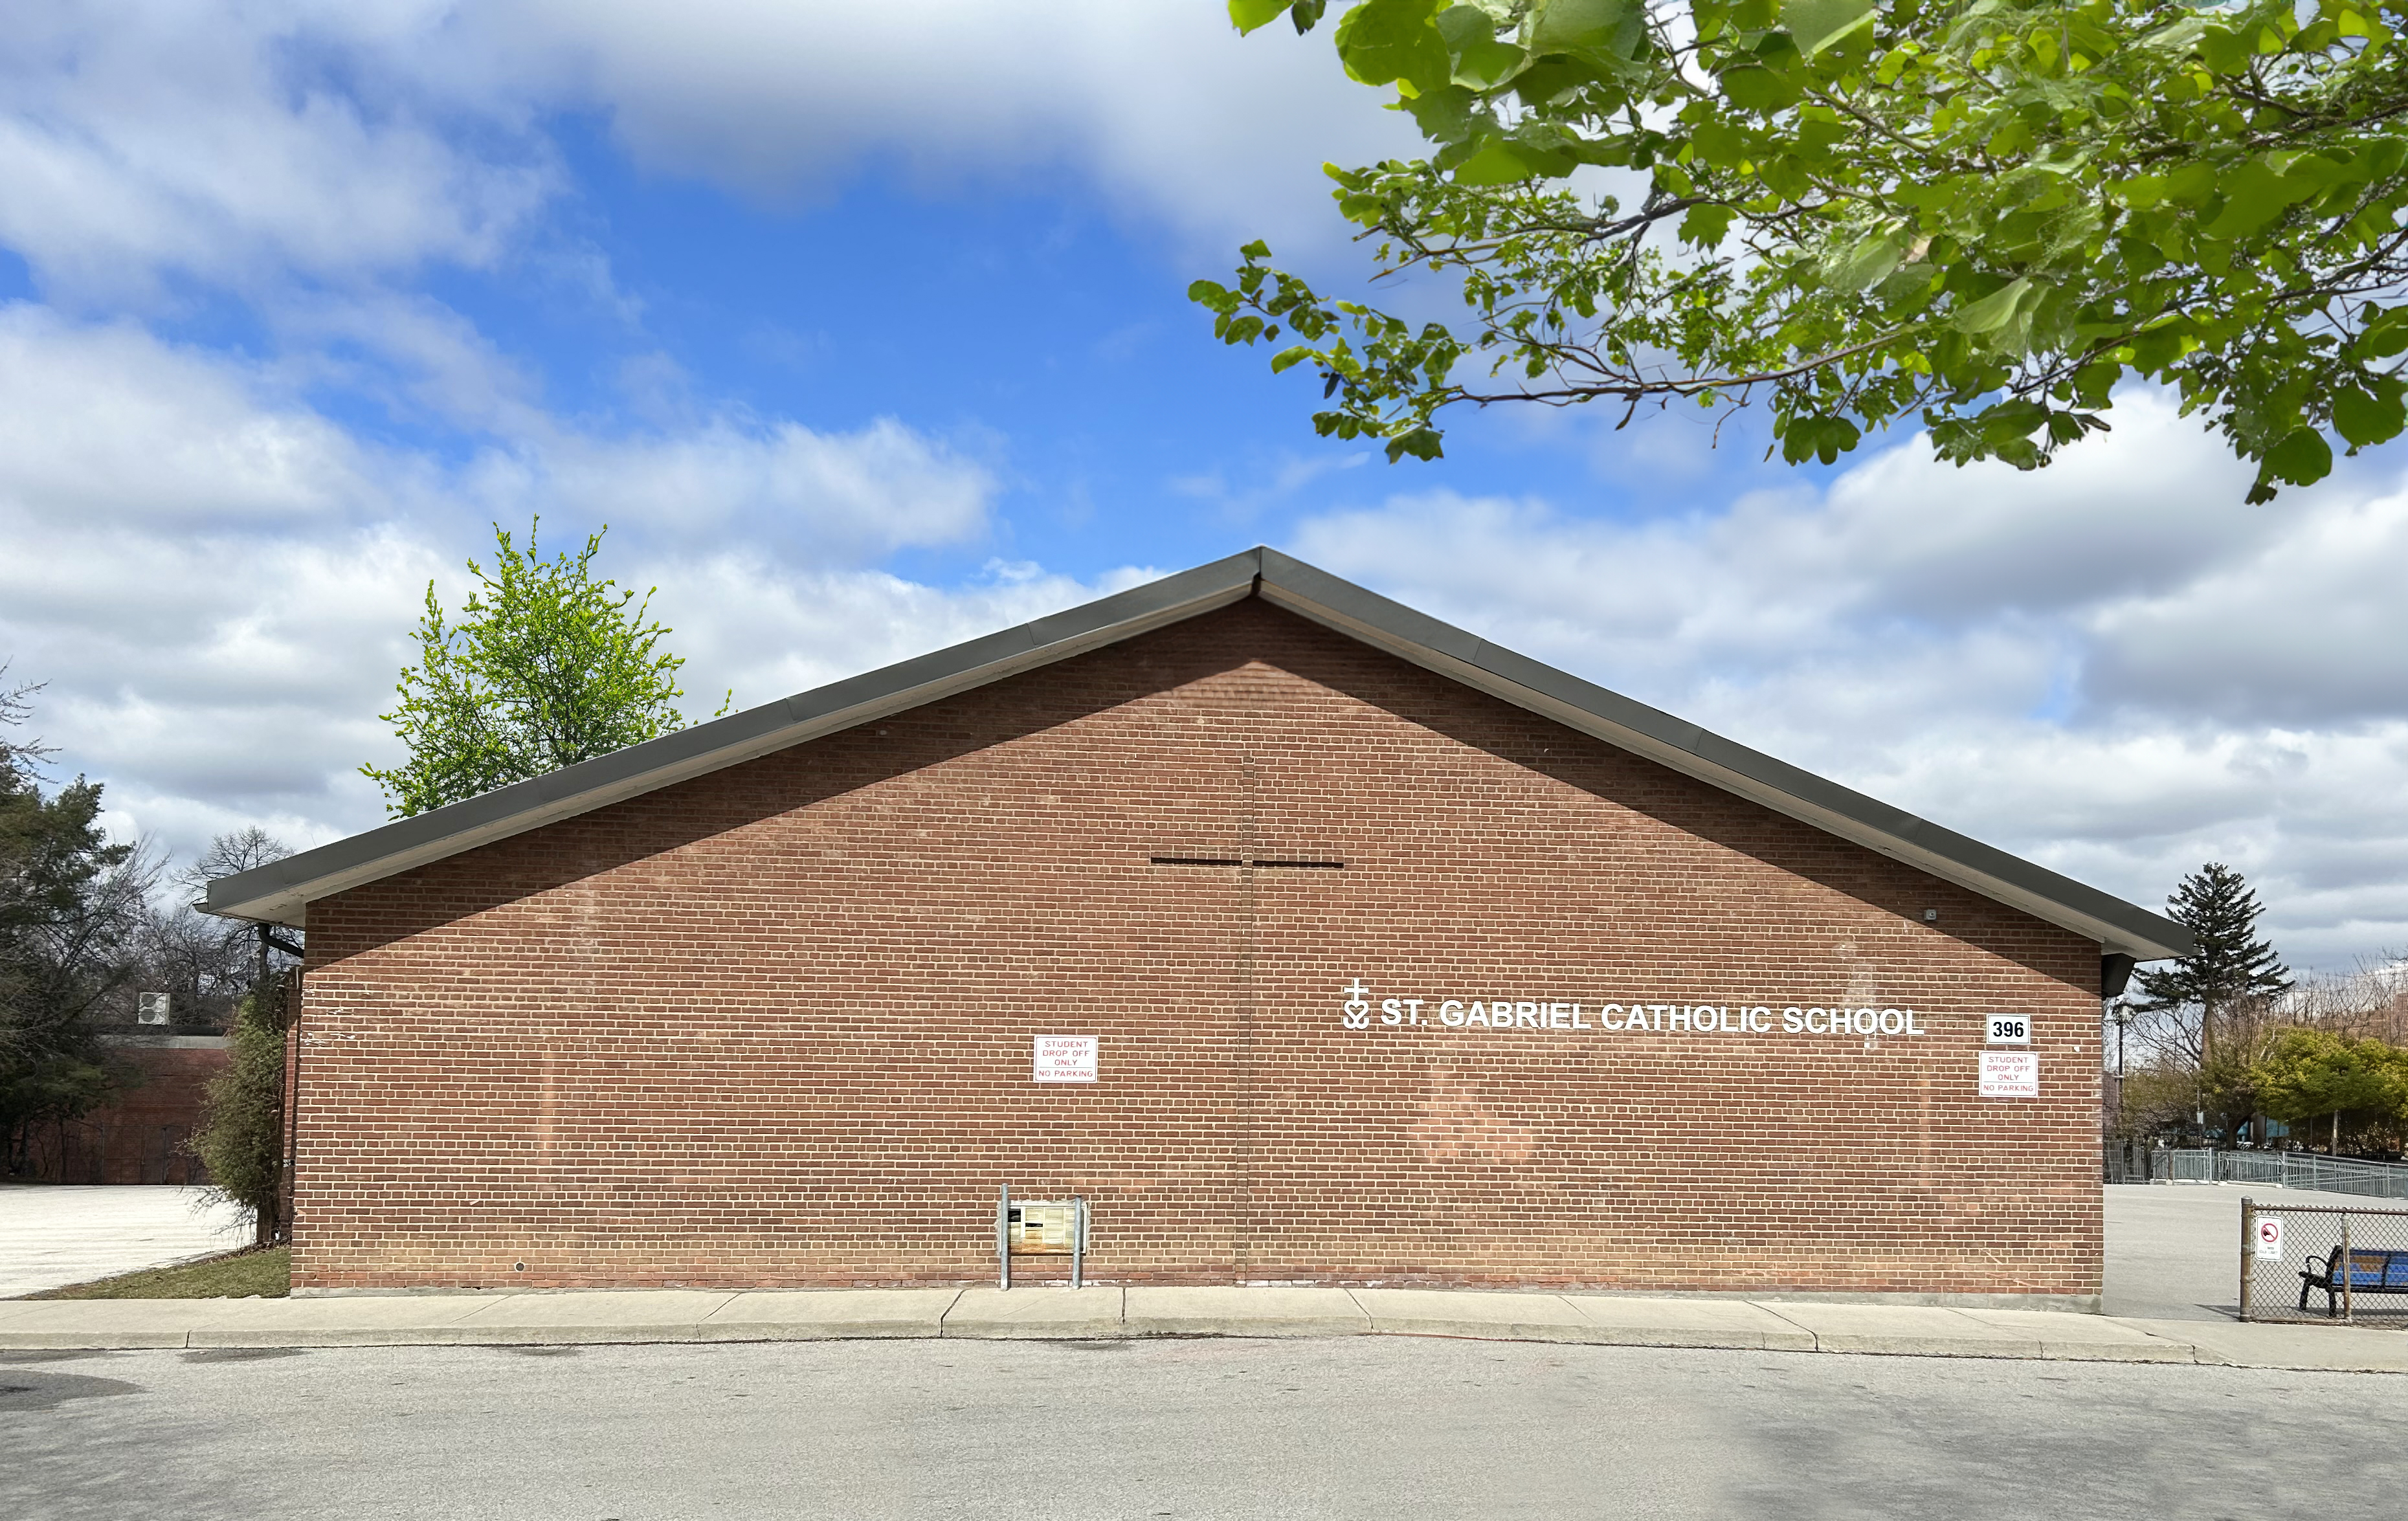 The front of the St. Gabriel Catholic School building.